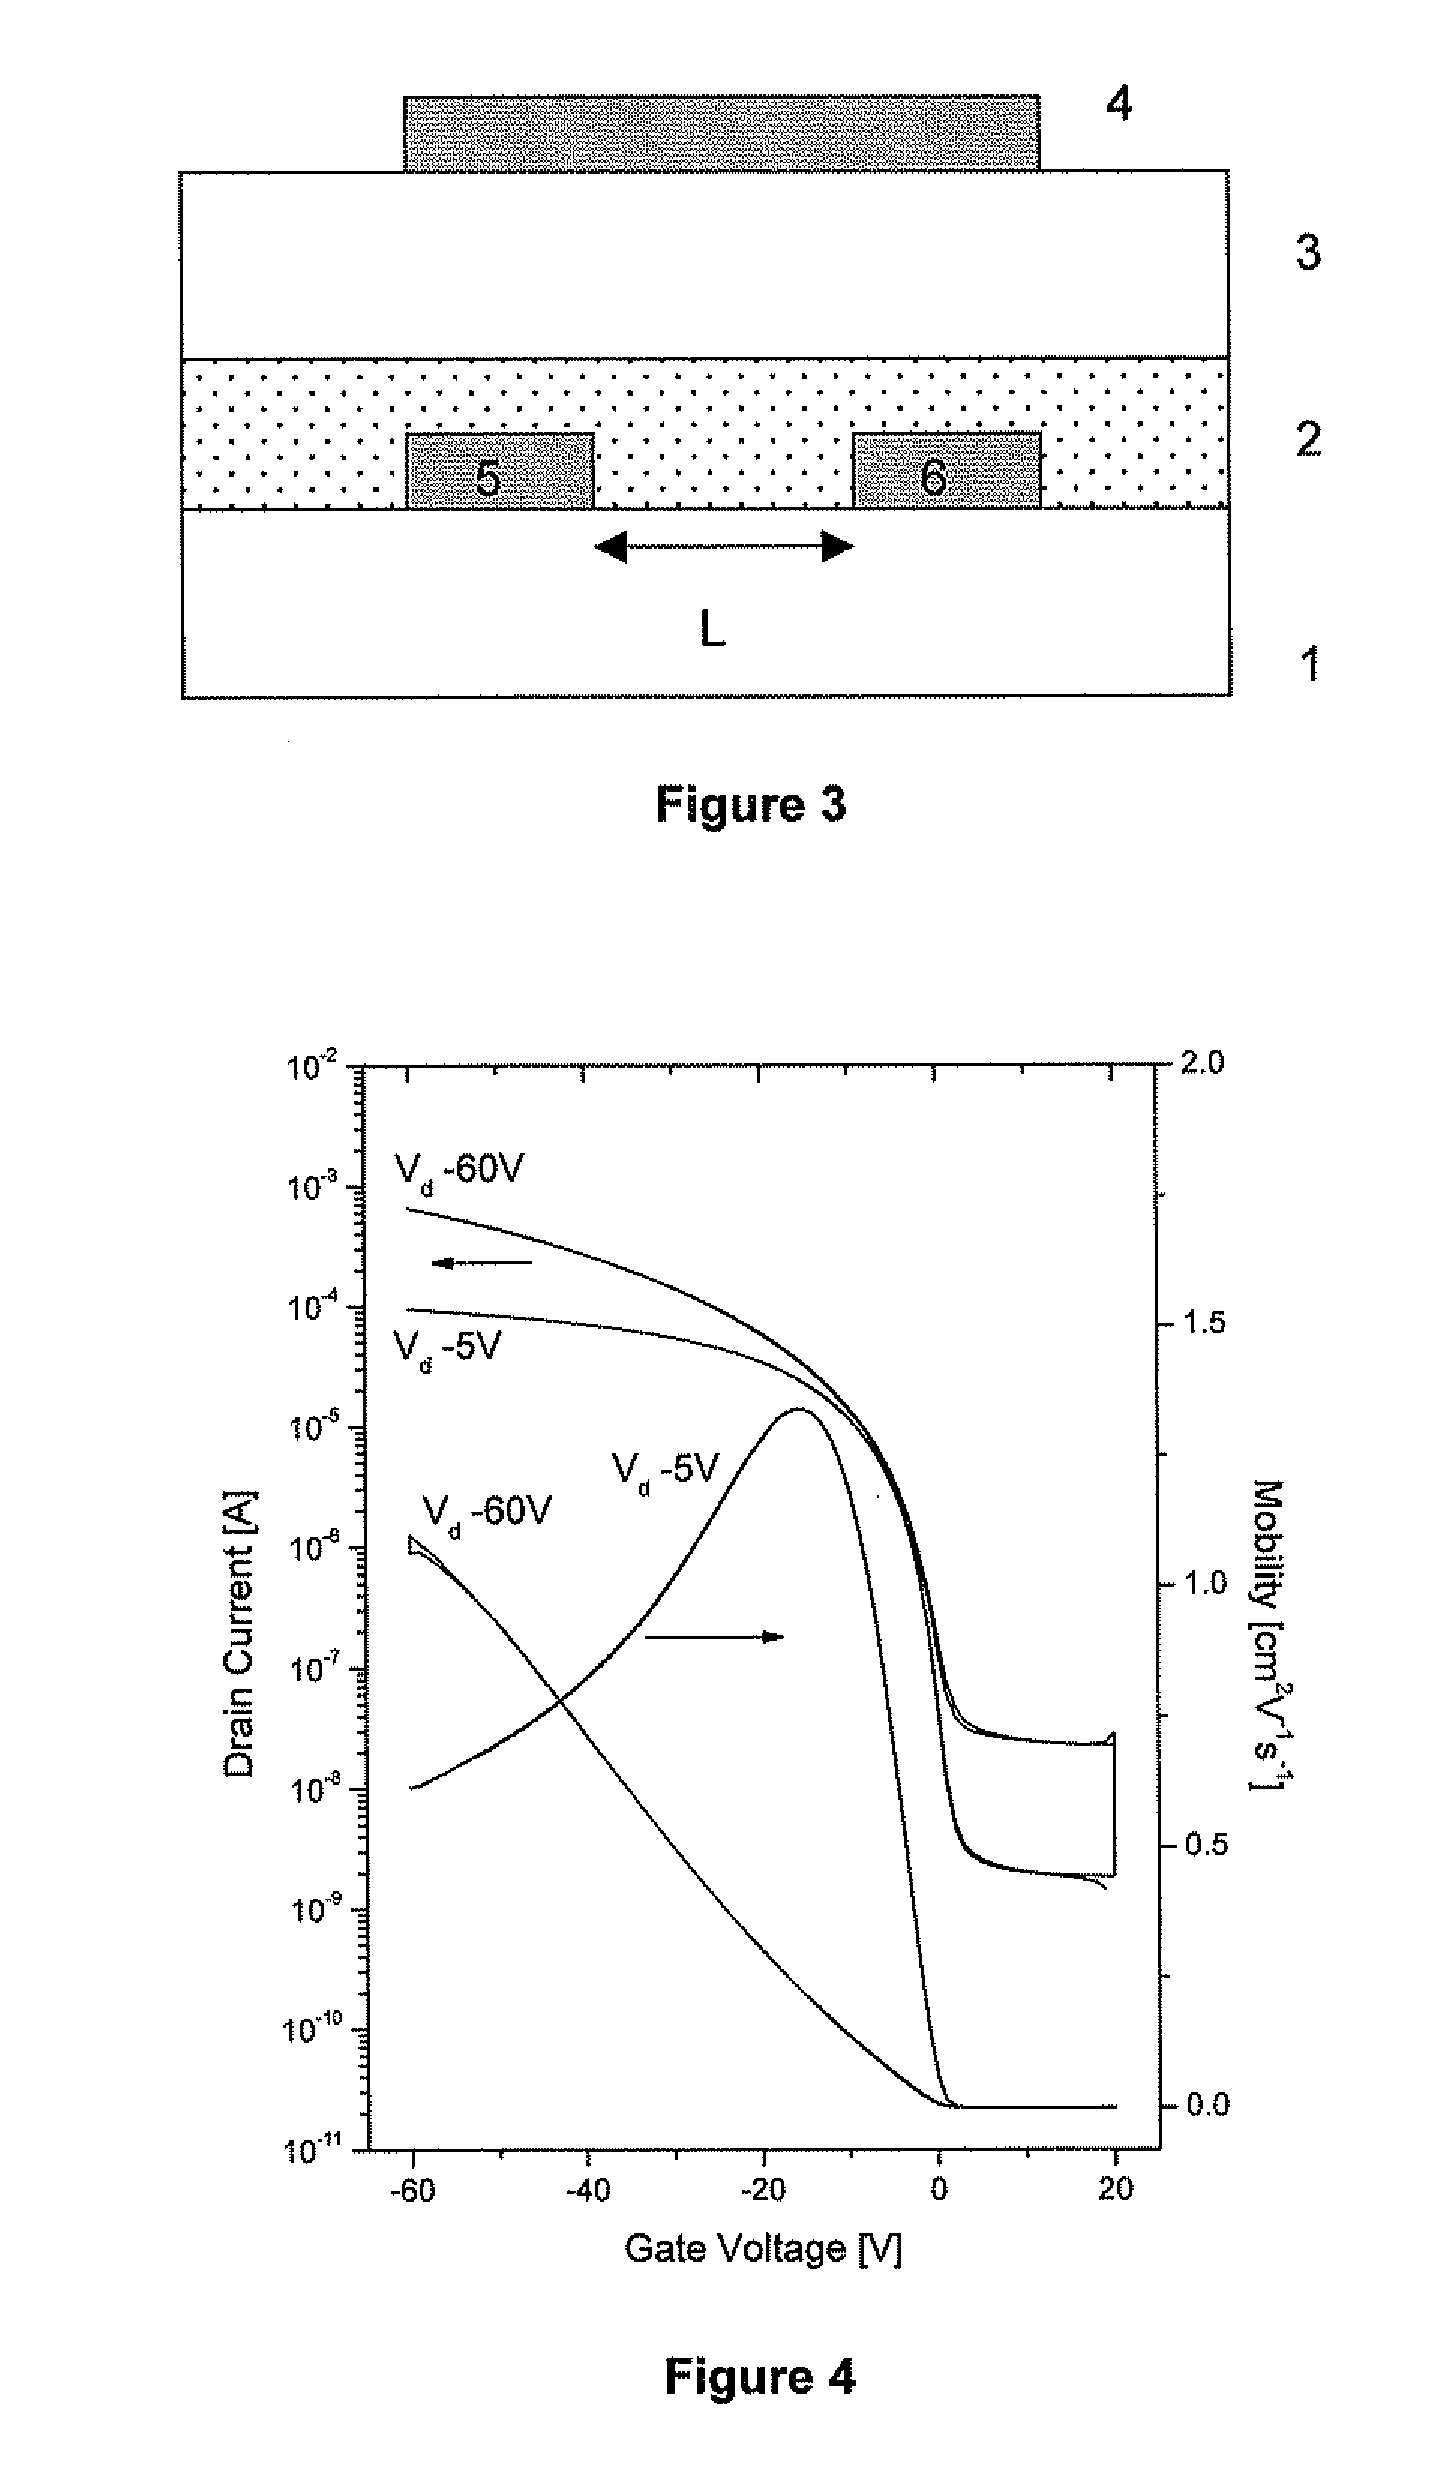 Electronic short channel device comprising an organic semiconductor formulation